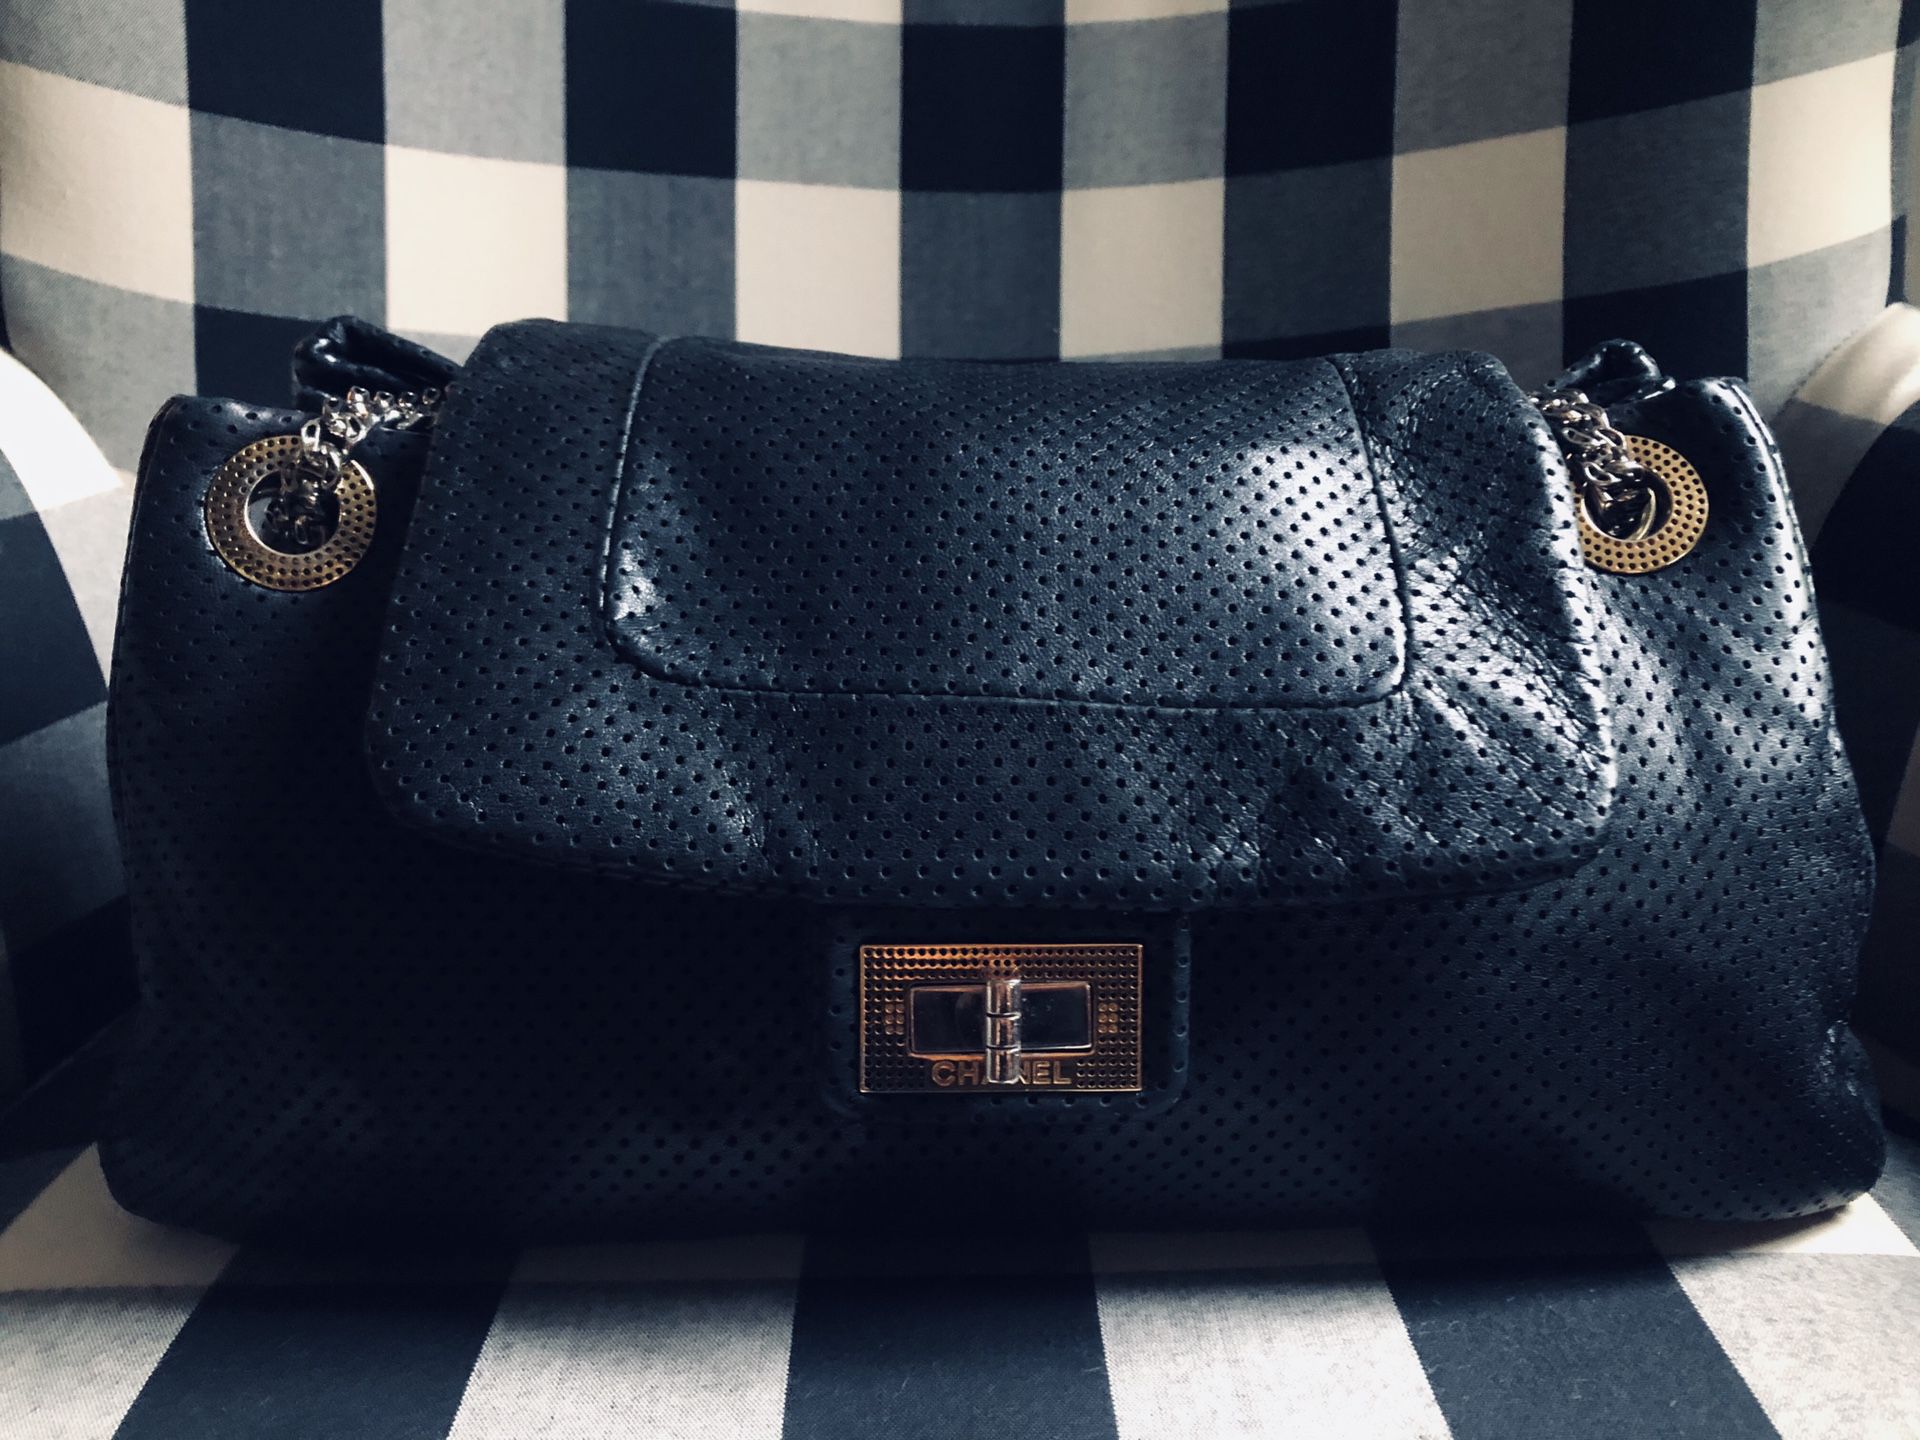 Chanel Classic Flap Perforated Leather Bag